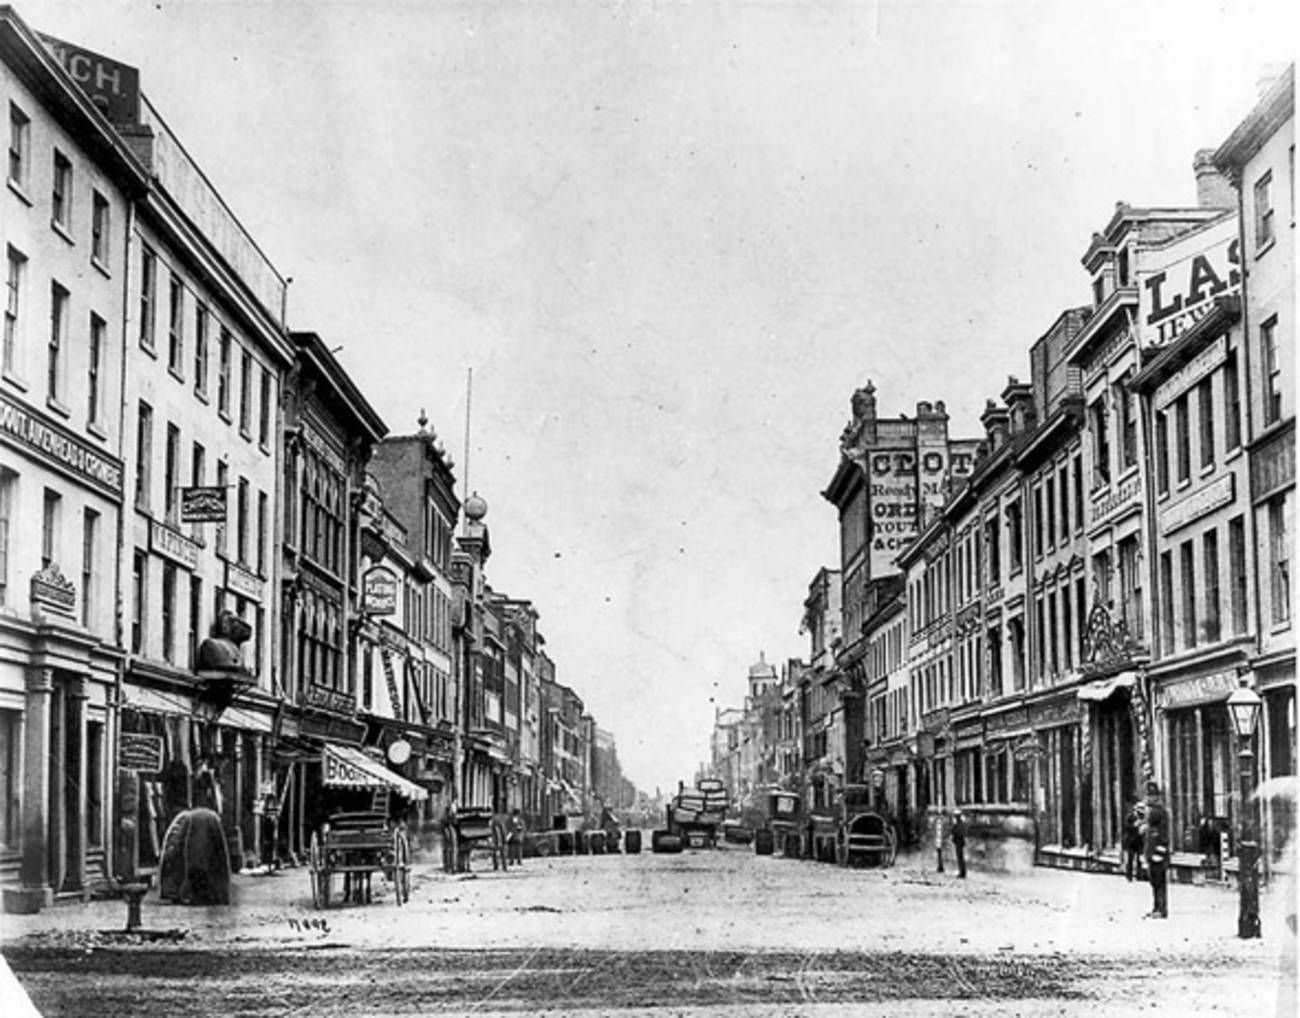 King and Yonge streets looking east, Toronot, Ontario, 1870s.